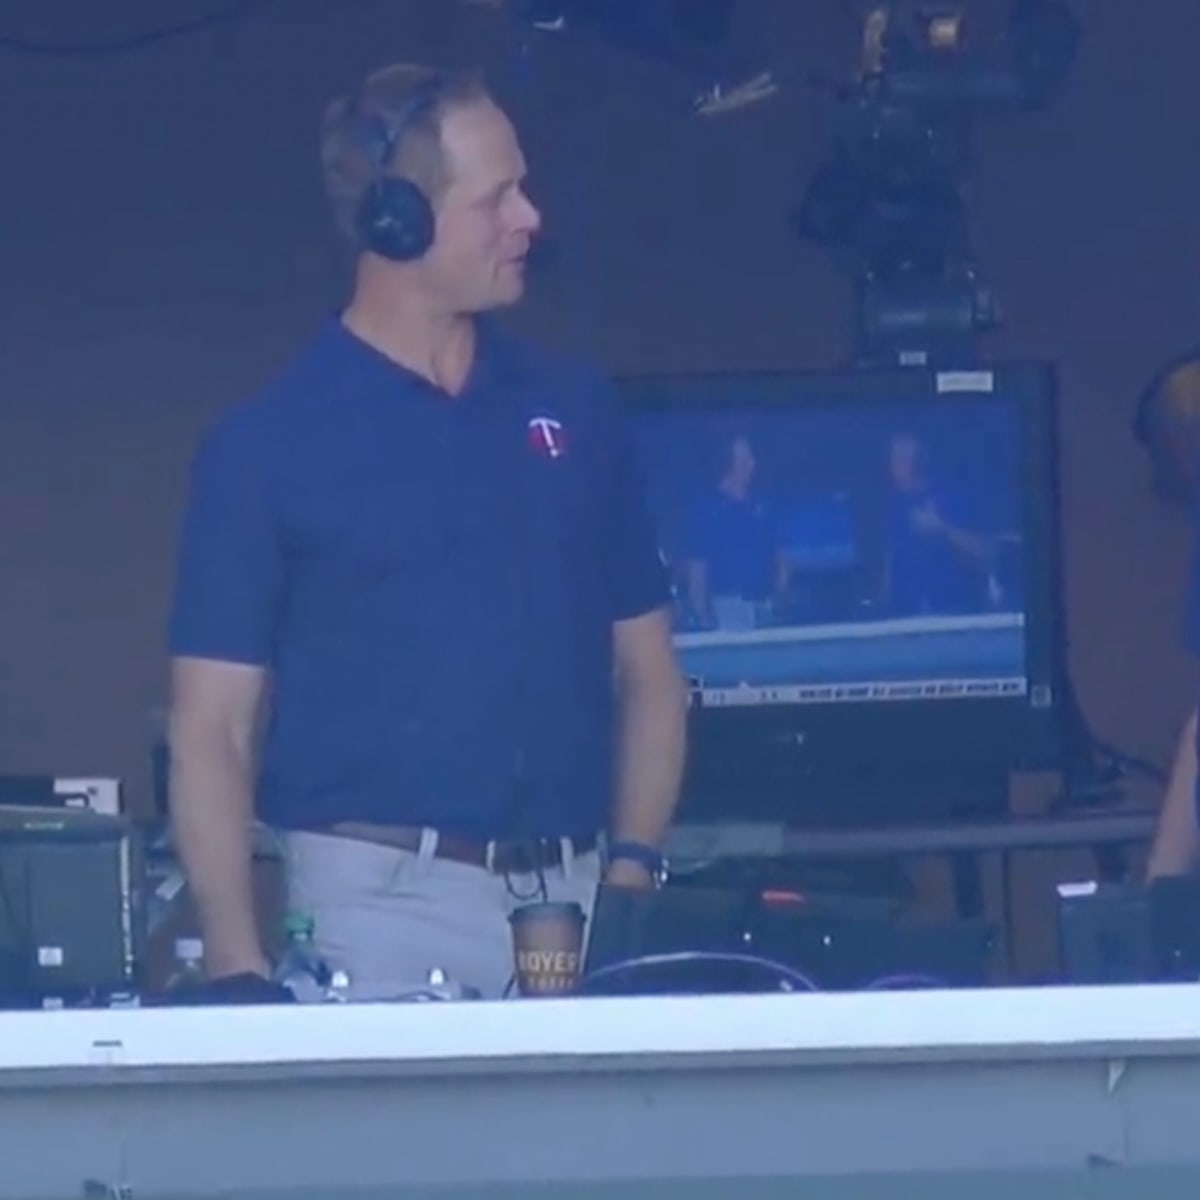 Dick Bremer brought to tears at end of 40th season calling Twins